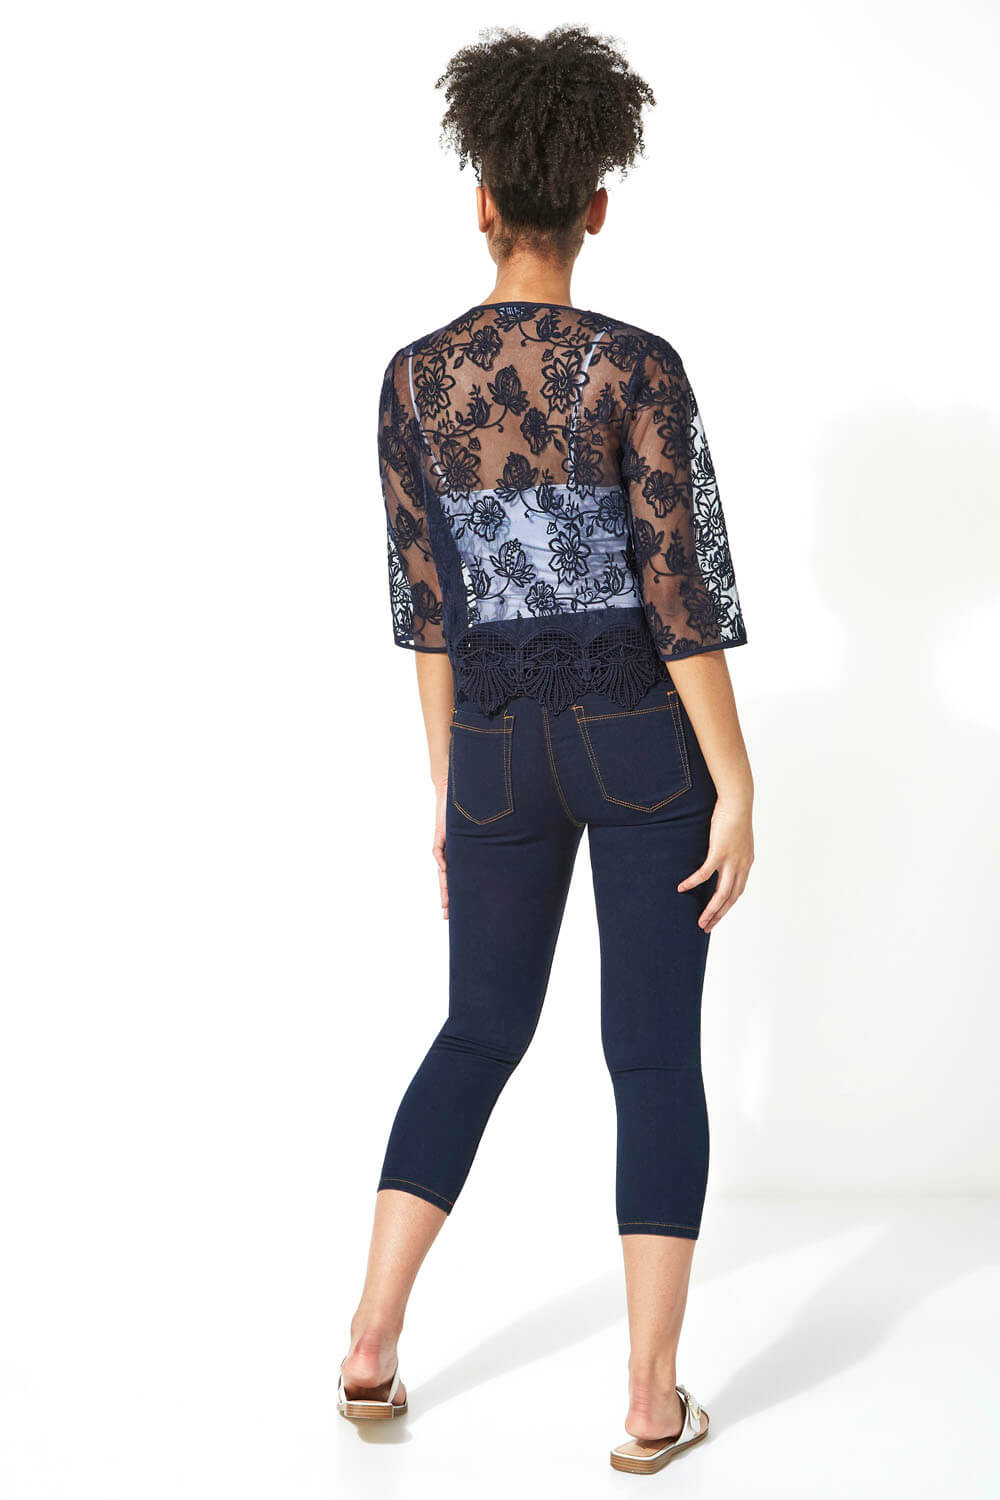 Navy  Short Floral Embroidered Lace Jacket, Image 3 of 5